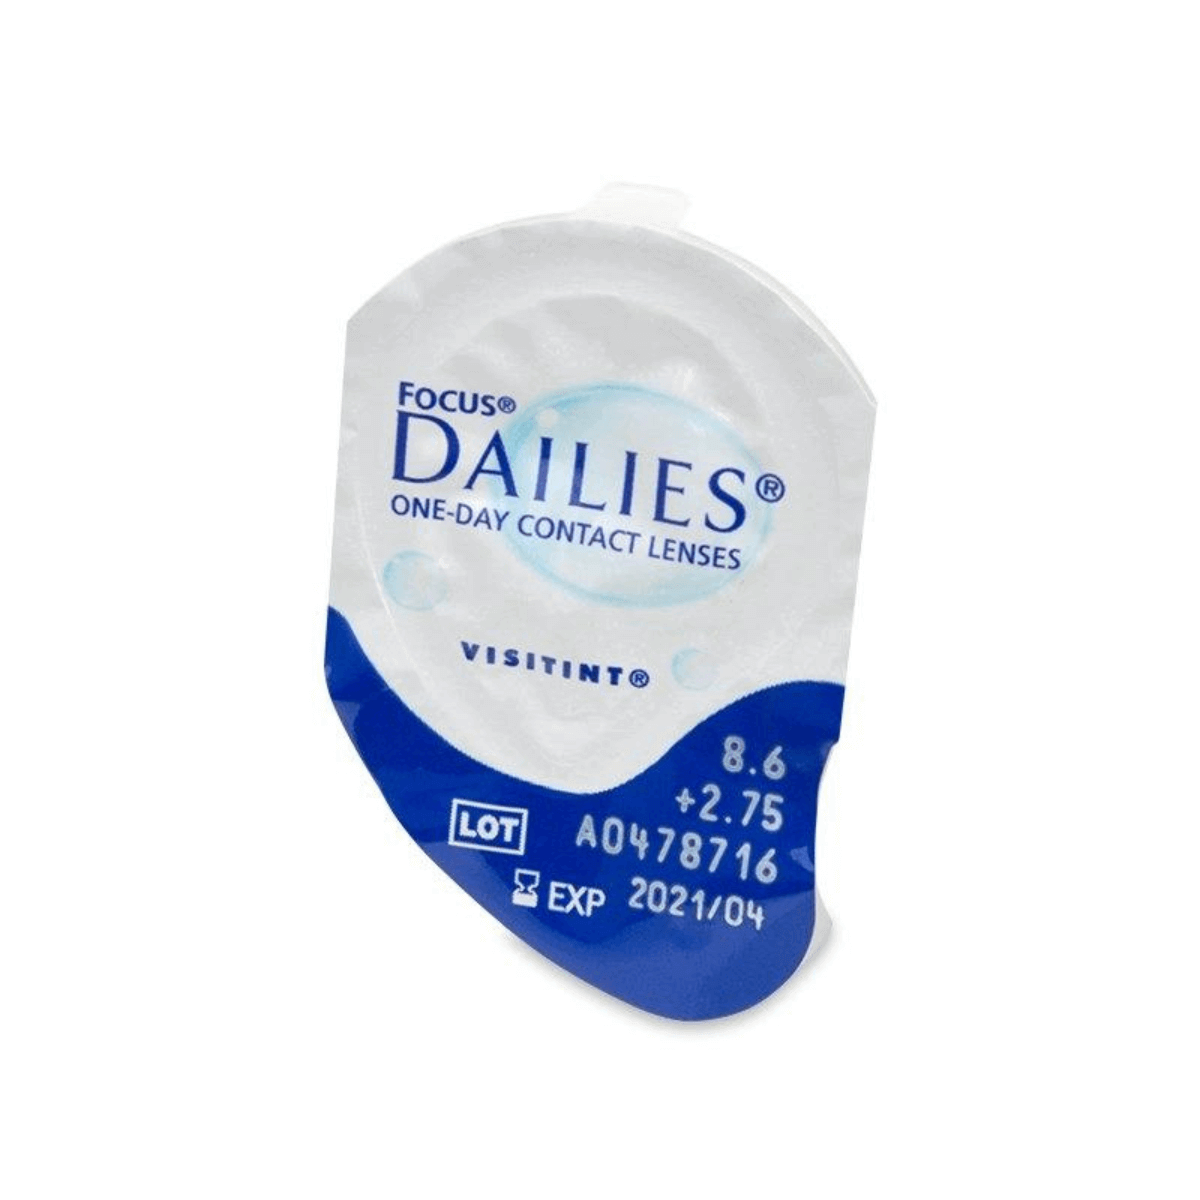 FOCUS DAILIES ALL DAY COMFORT DAILY DISPOSABLE CONTACT LENSES (30 LENSES)